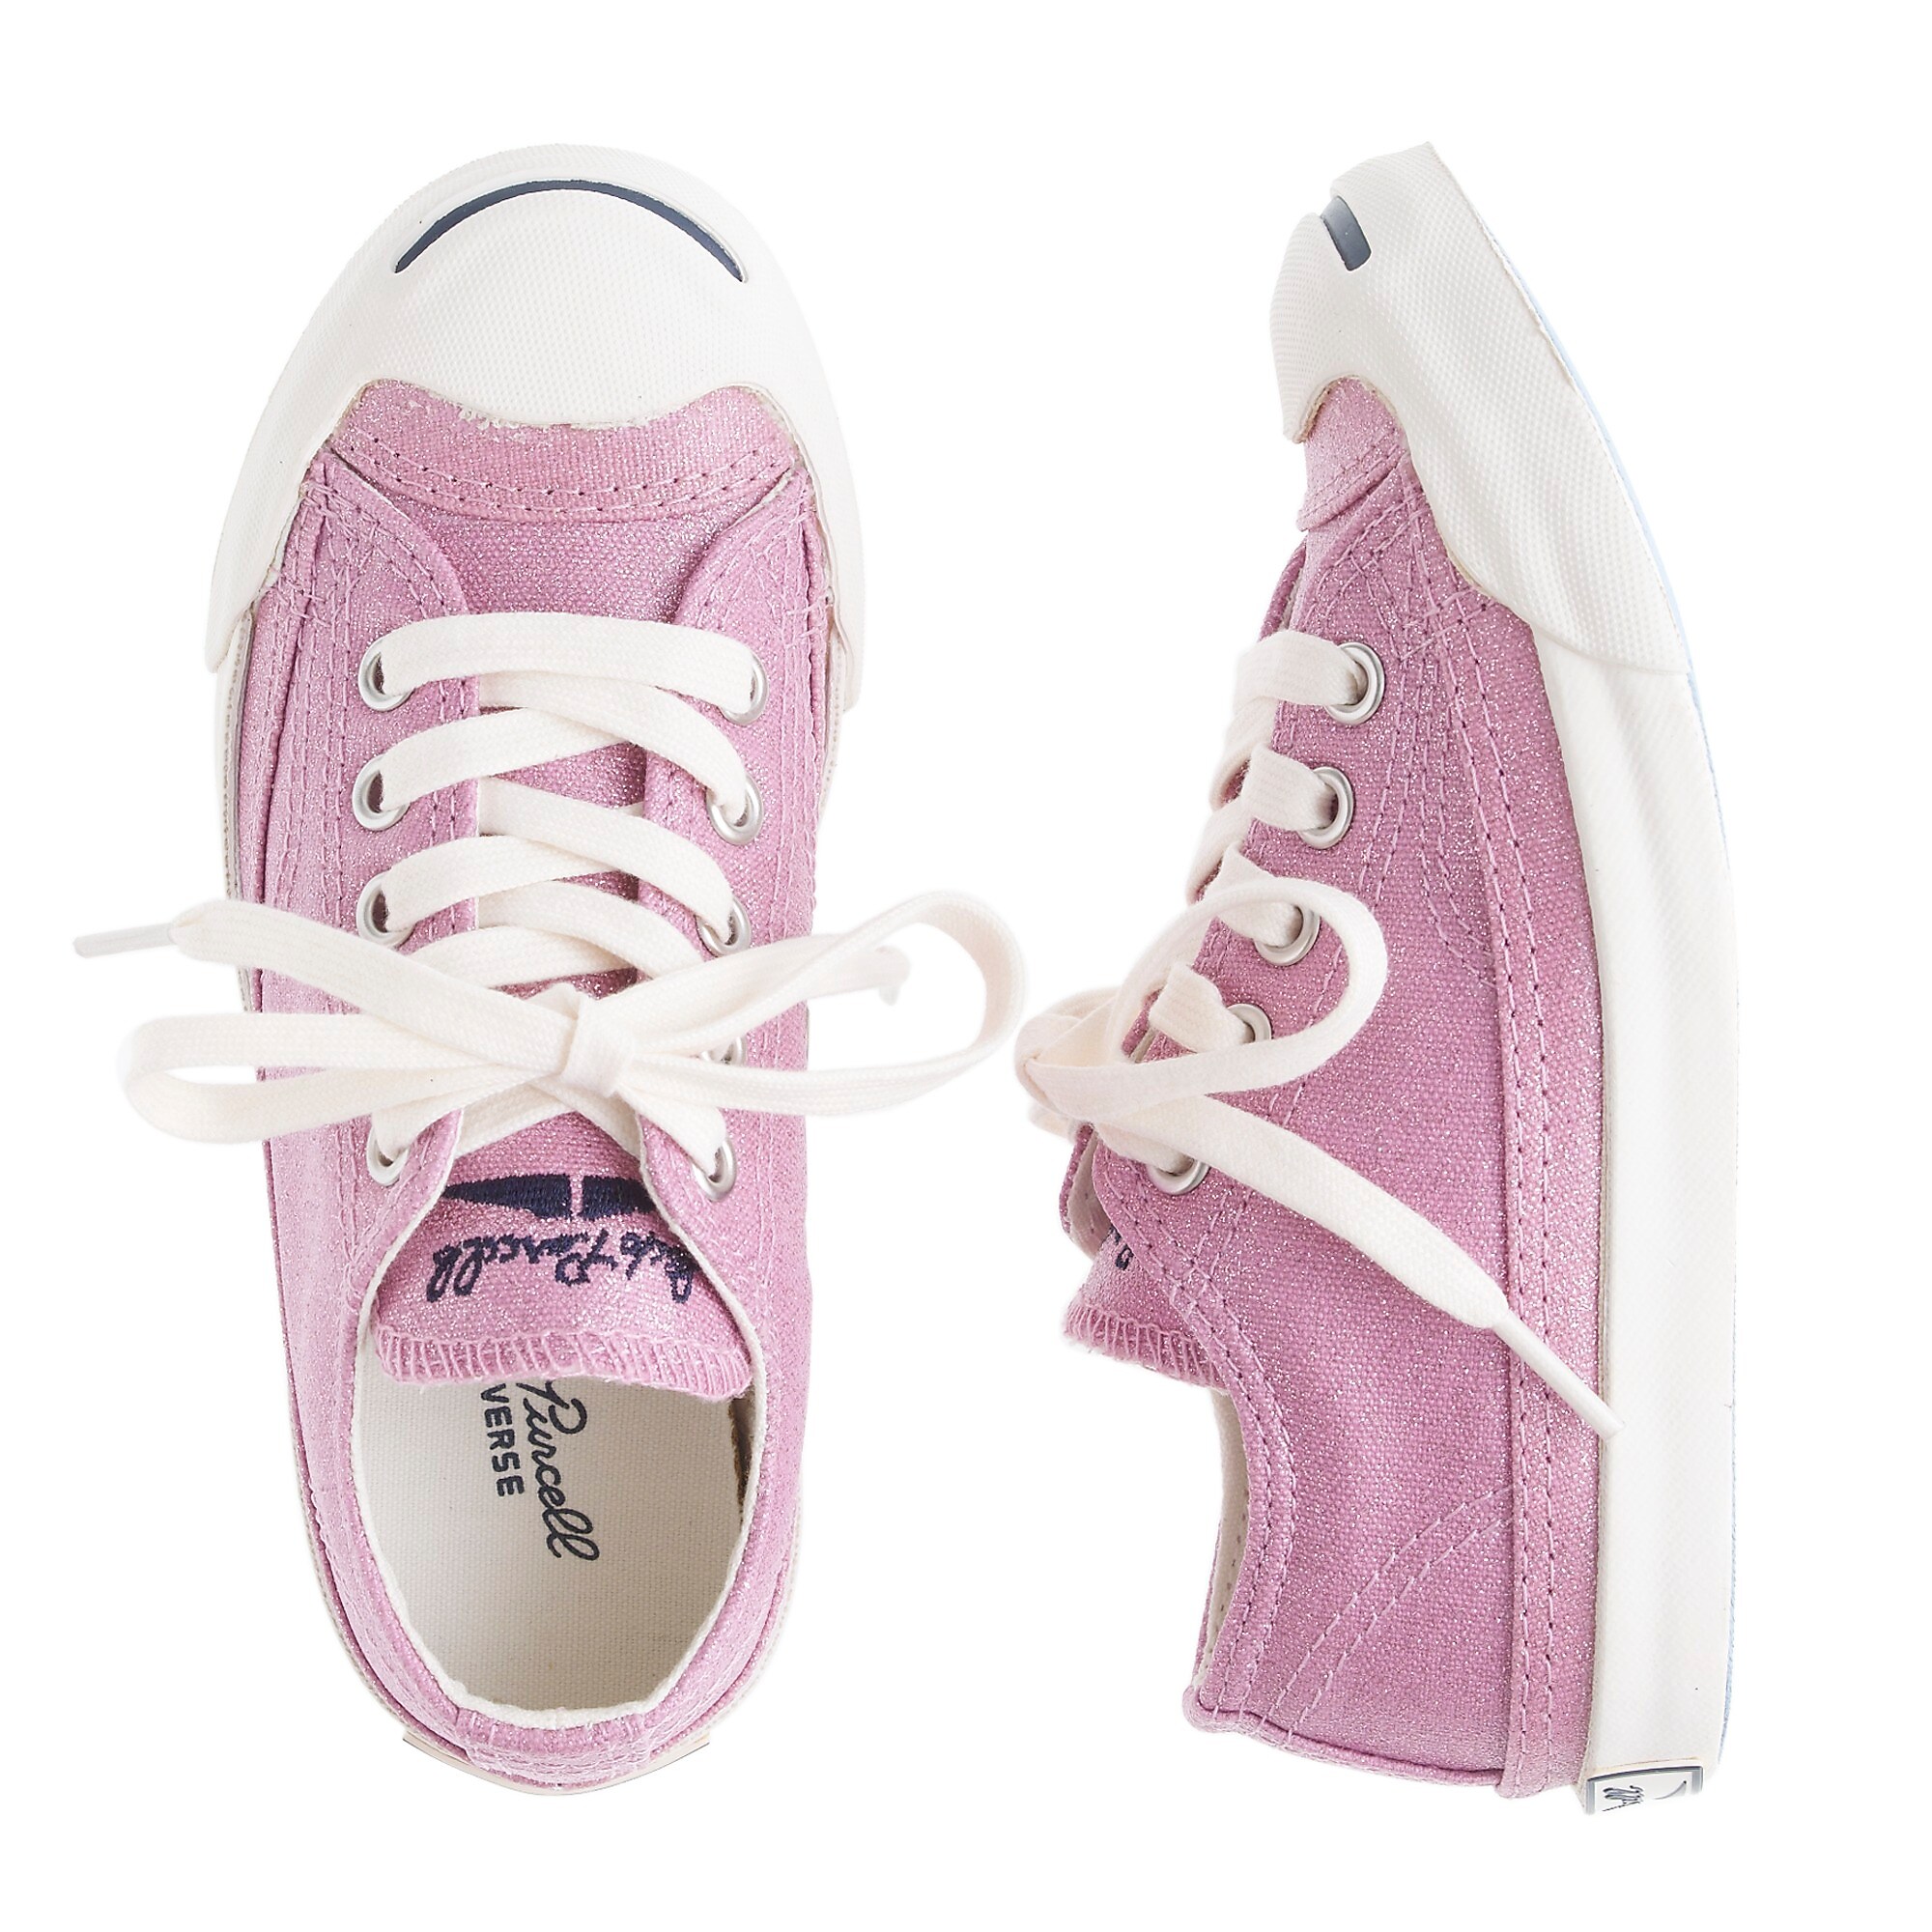 Girls' Converse® Jack Purcell® glitter canvas sneakers : Girl sneakers ...